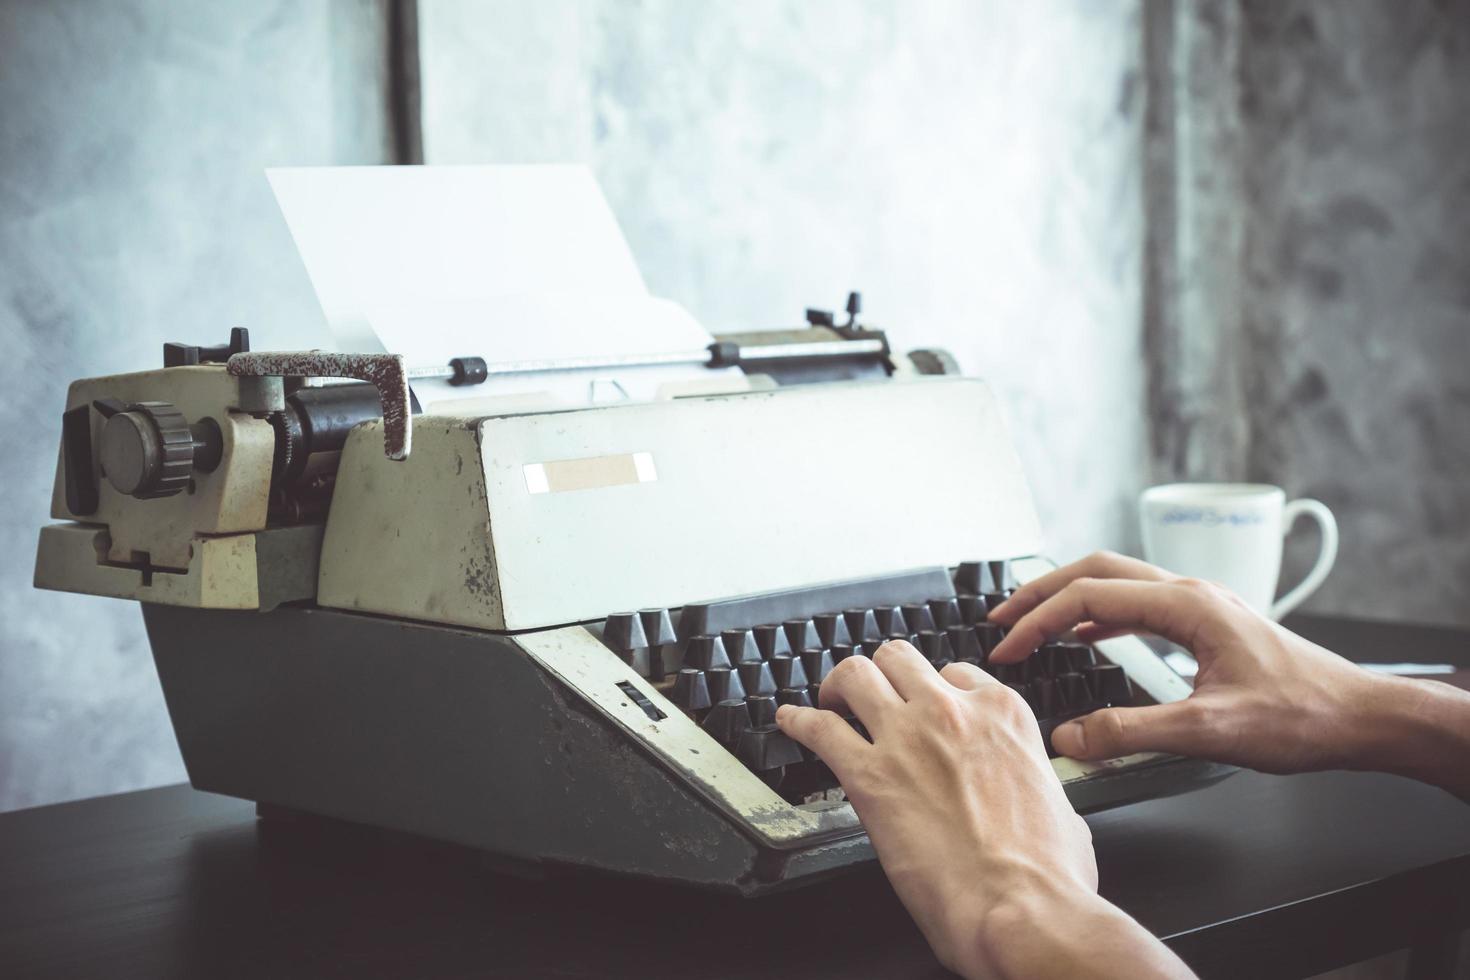 Close up of Male hands typing on typewriter on the desk. Vintage tone photo